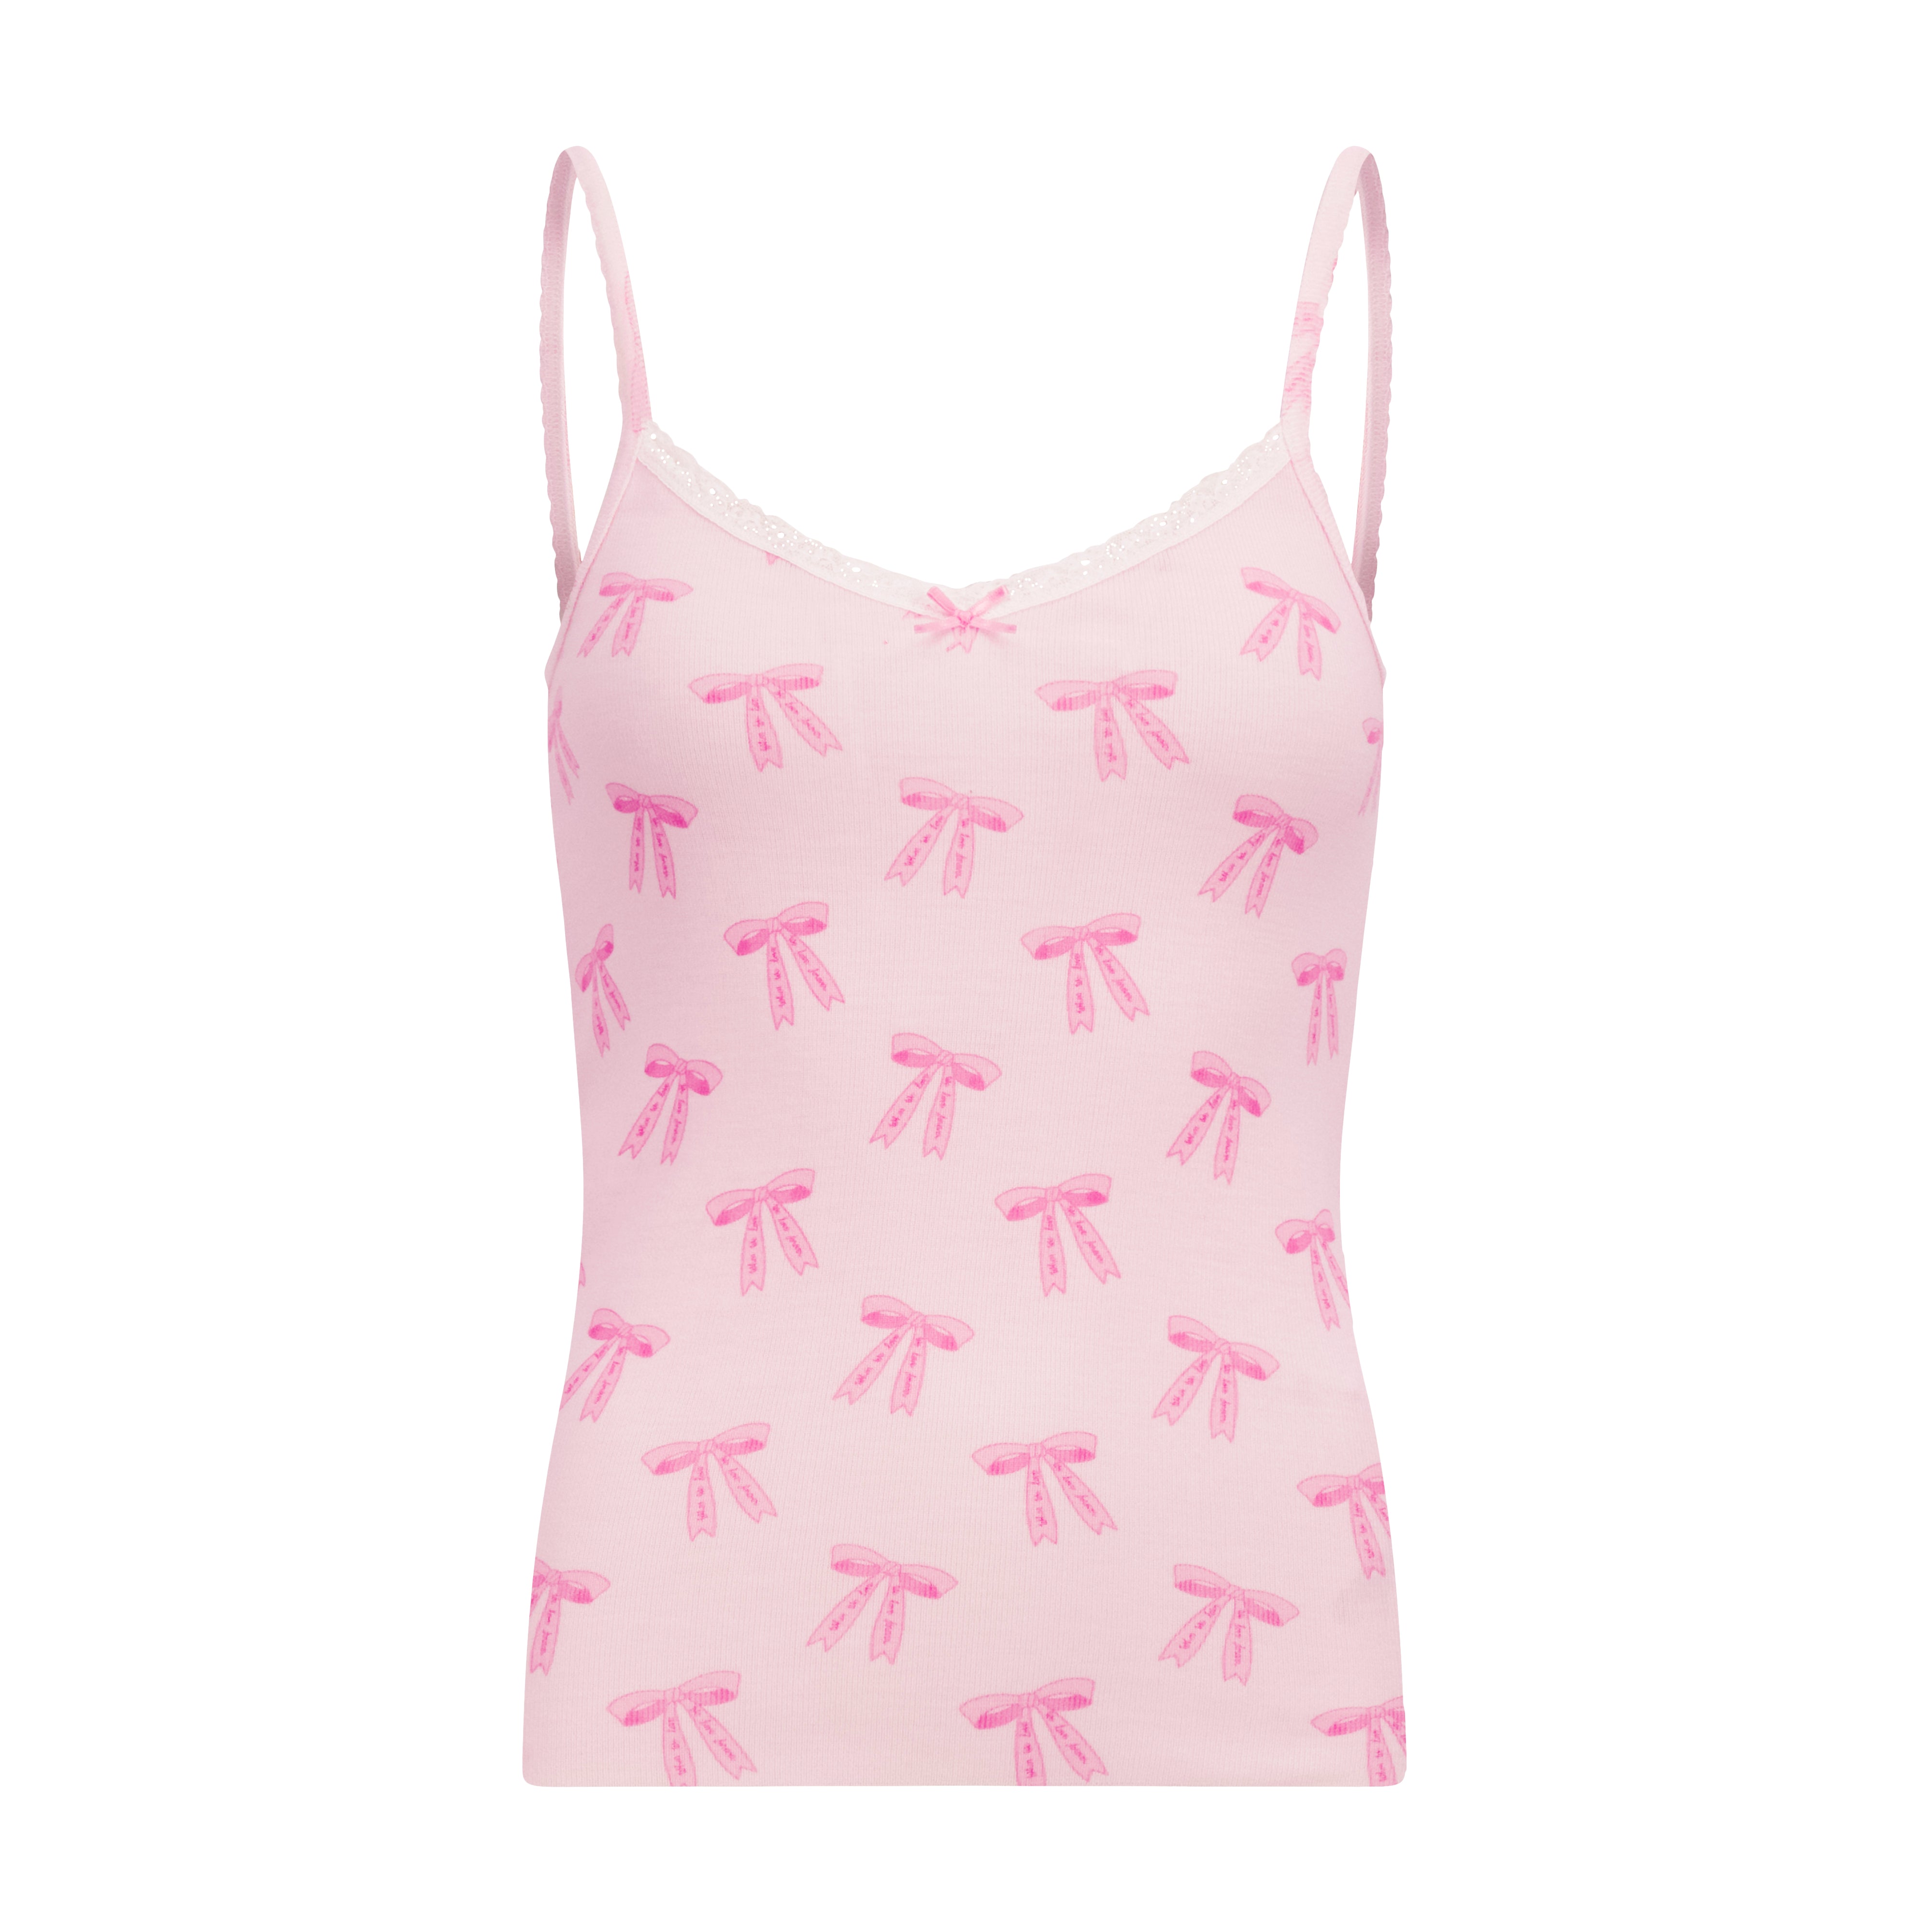 PATTI CAMISOLE Forever Love Bow Print